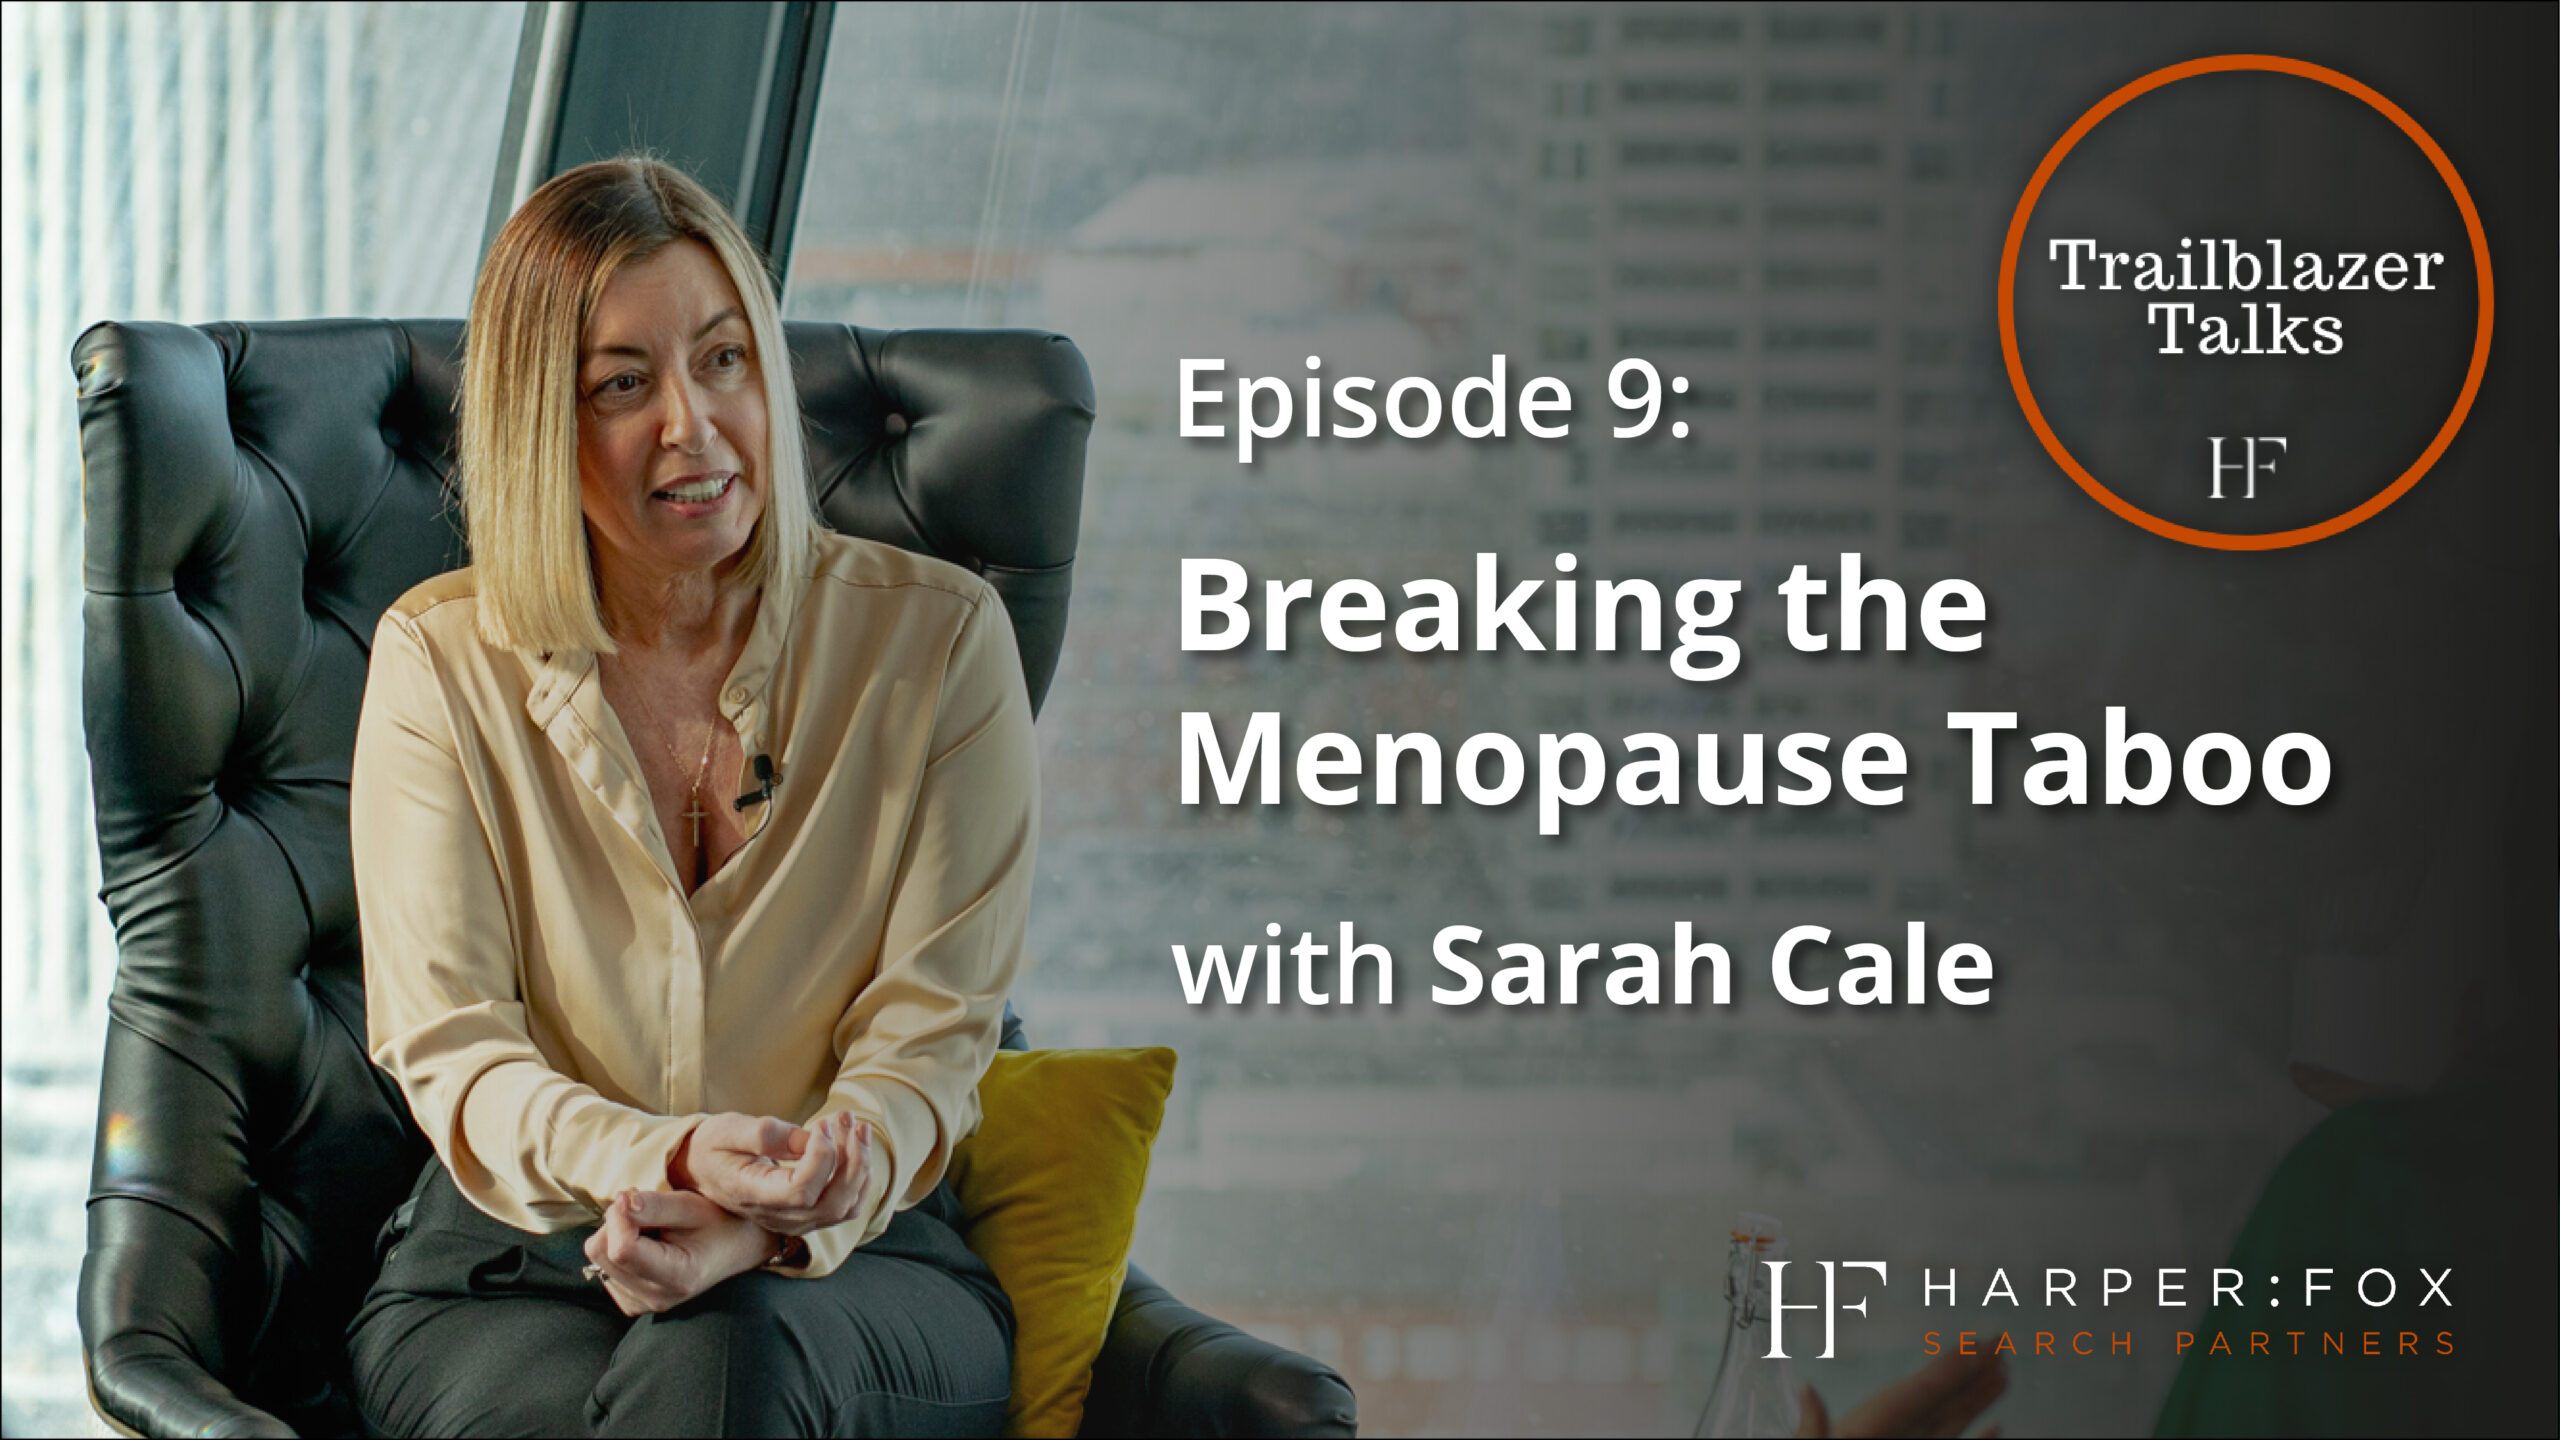 Breaking the Menopause Taboo with Sarah Cale